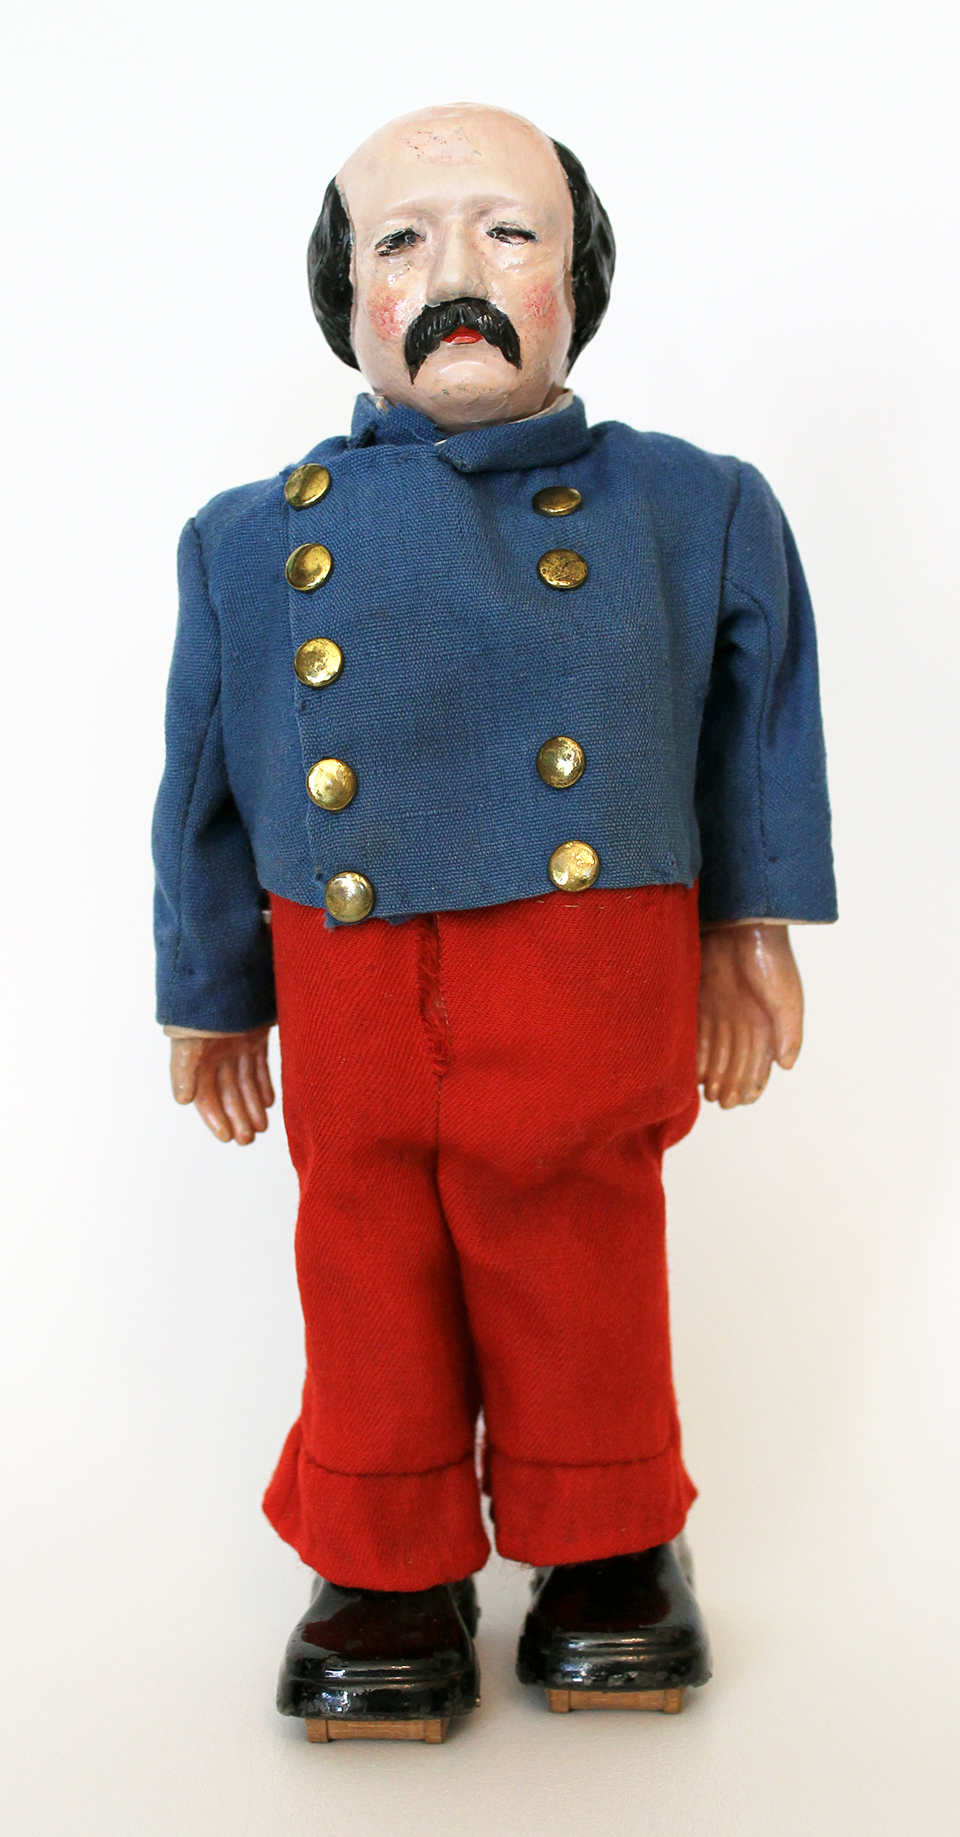 A 19th century mechanical walking doll toy made in the likeness of U.S. politician and general Benjamin Butler.